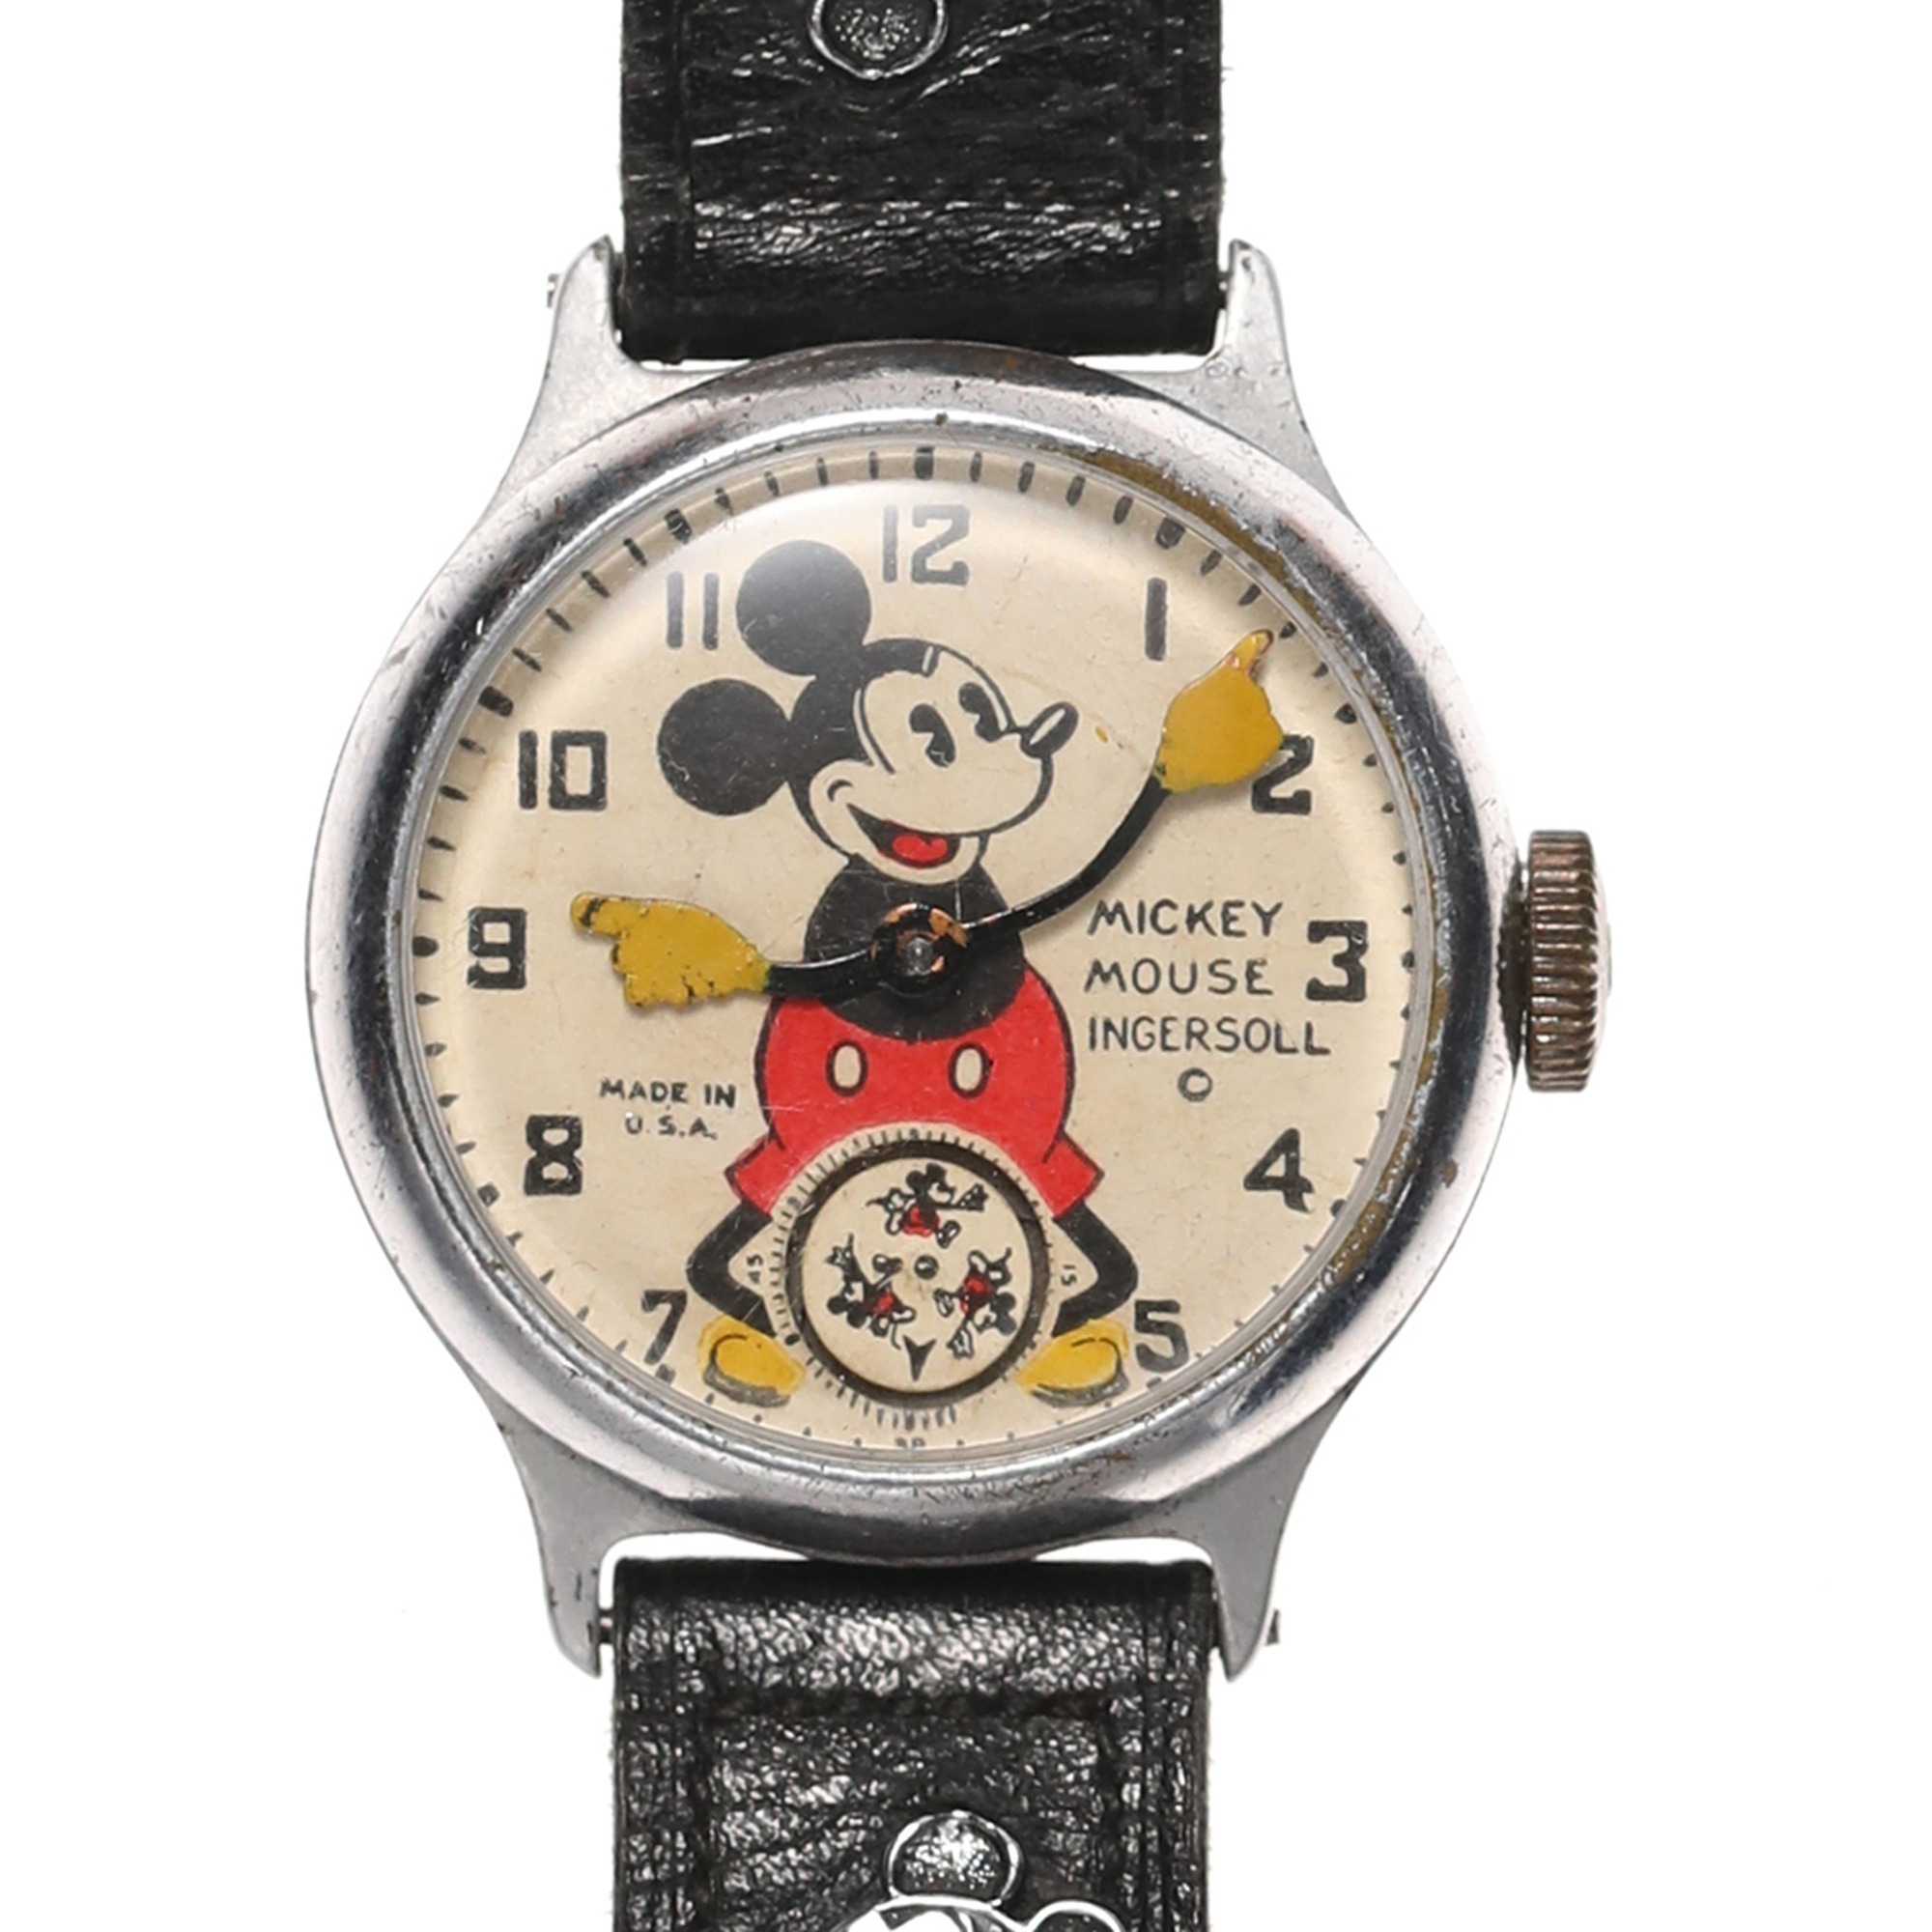 Ingersoll Mickey Mouse Wristwatch with Original Strap